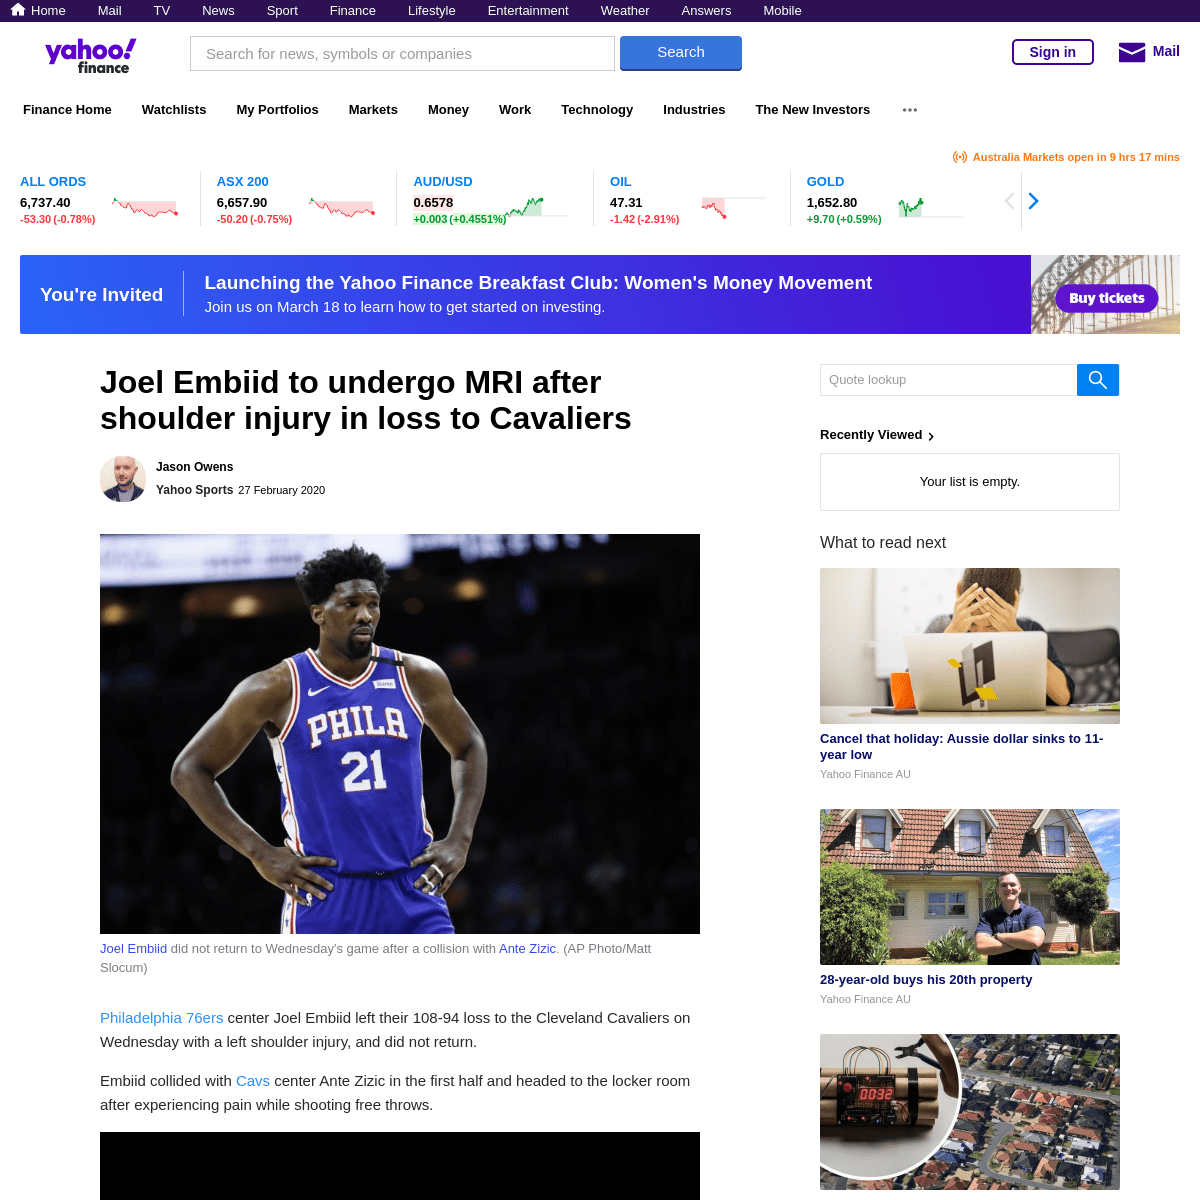 A complete backup of au.finance.yahoo.com/news/joel-embiid-leaves-76-ers-game-with-shoulder-injury-011444522.html